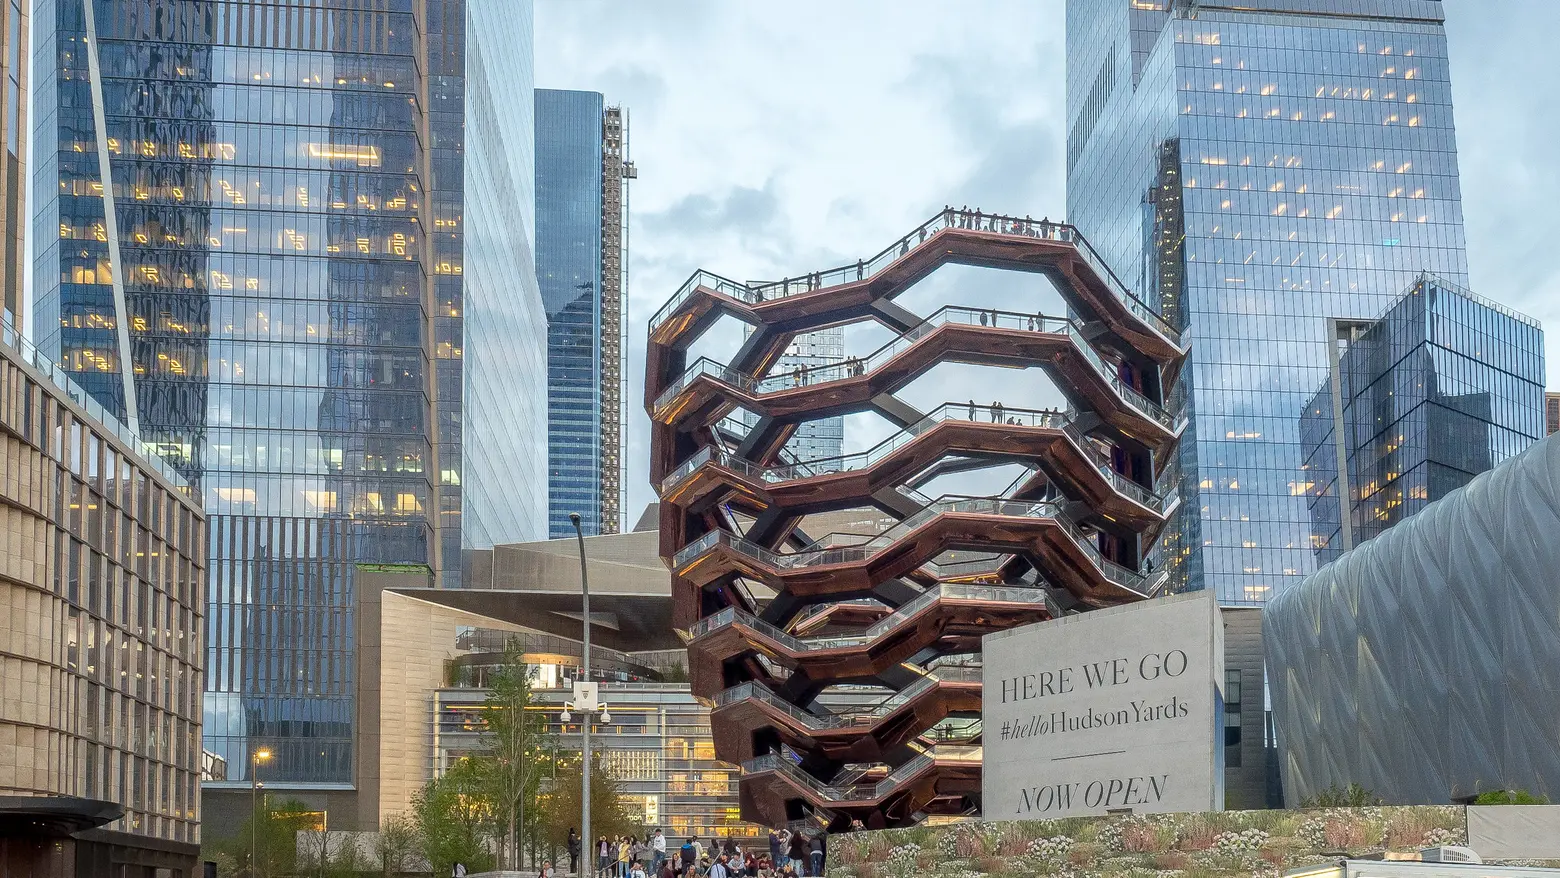 Equinox will open a co-working space at Hudson Yards